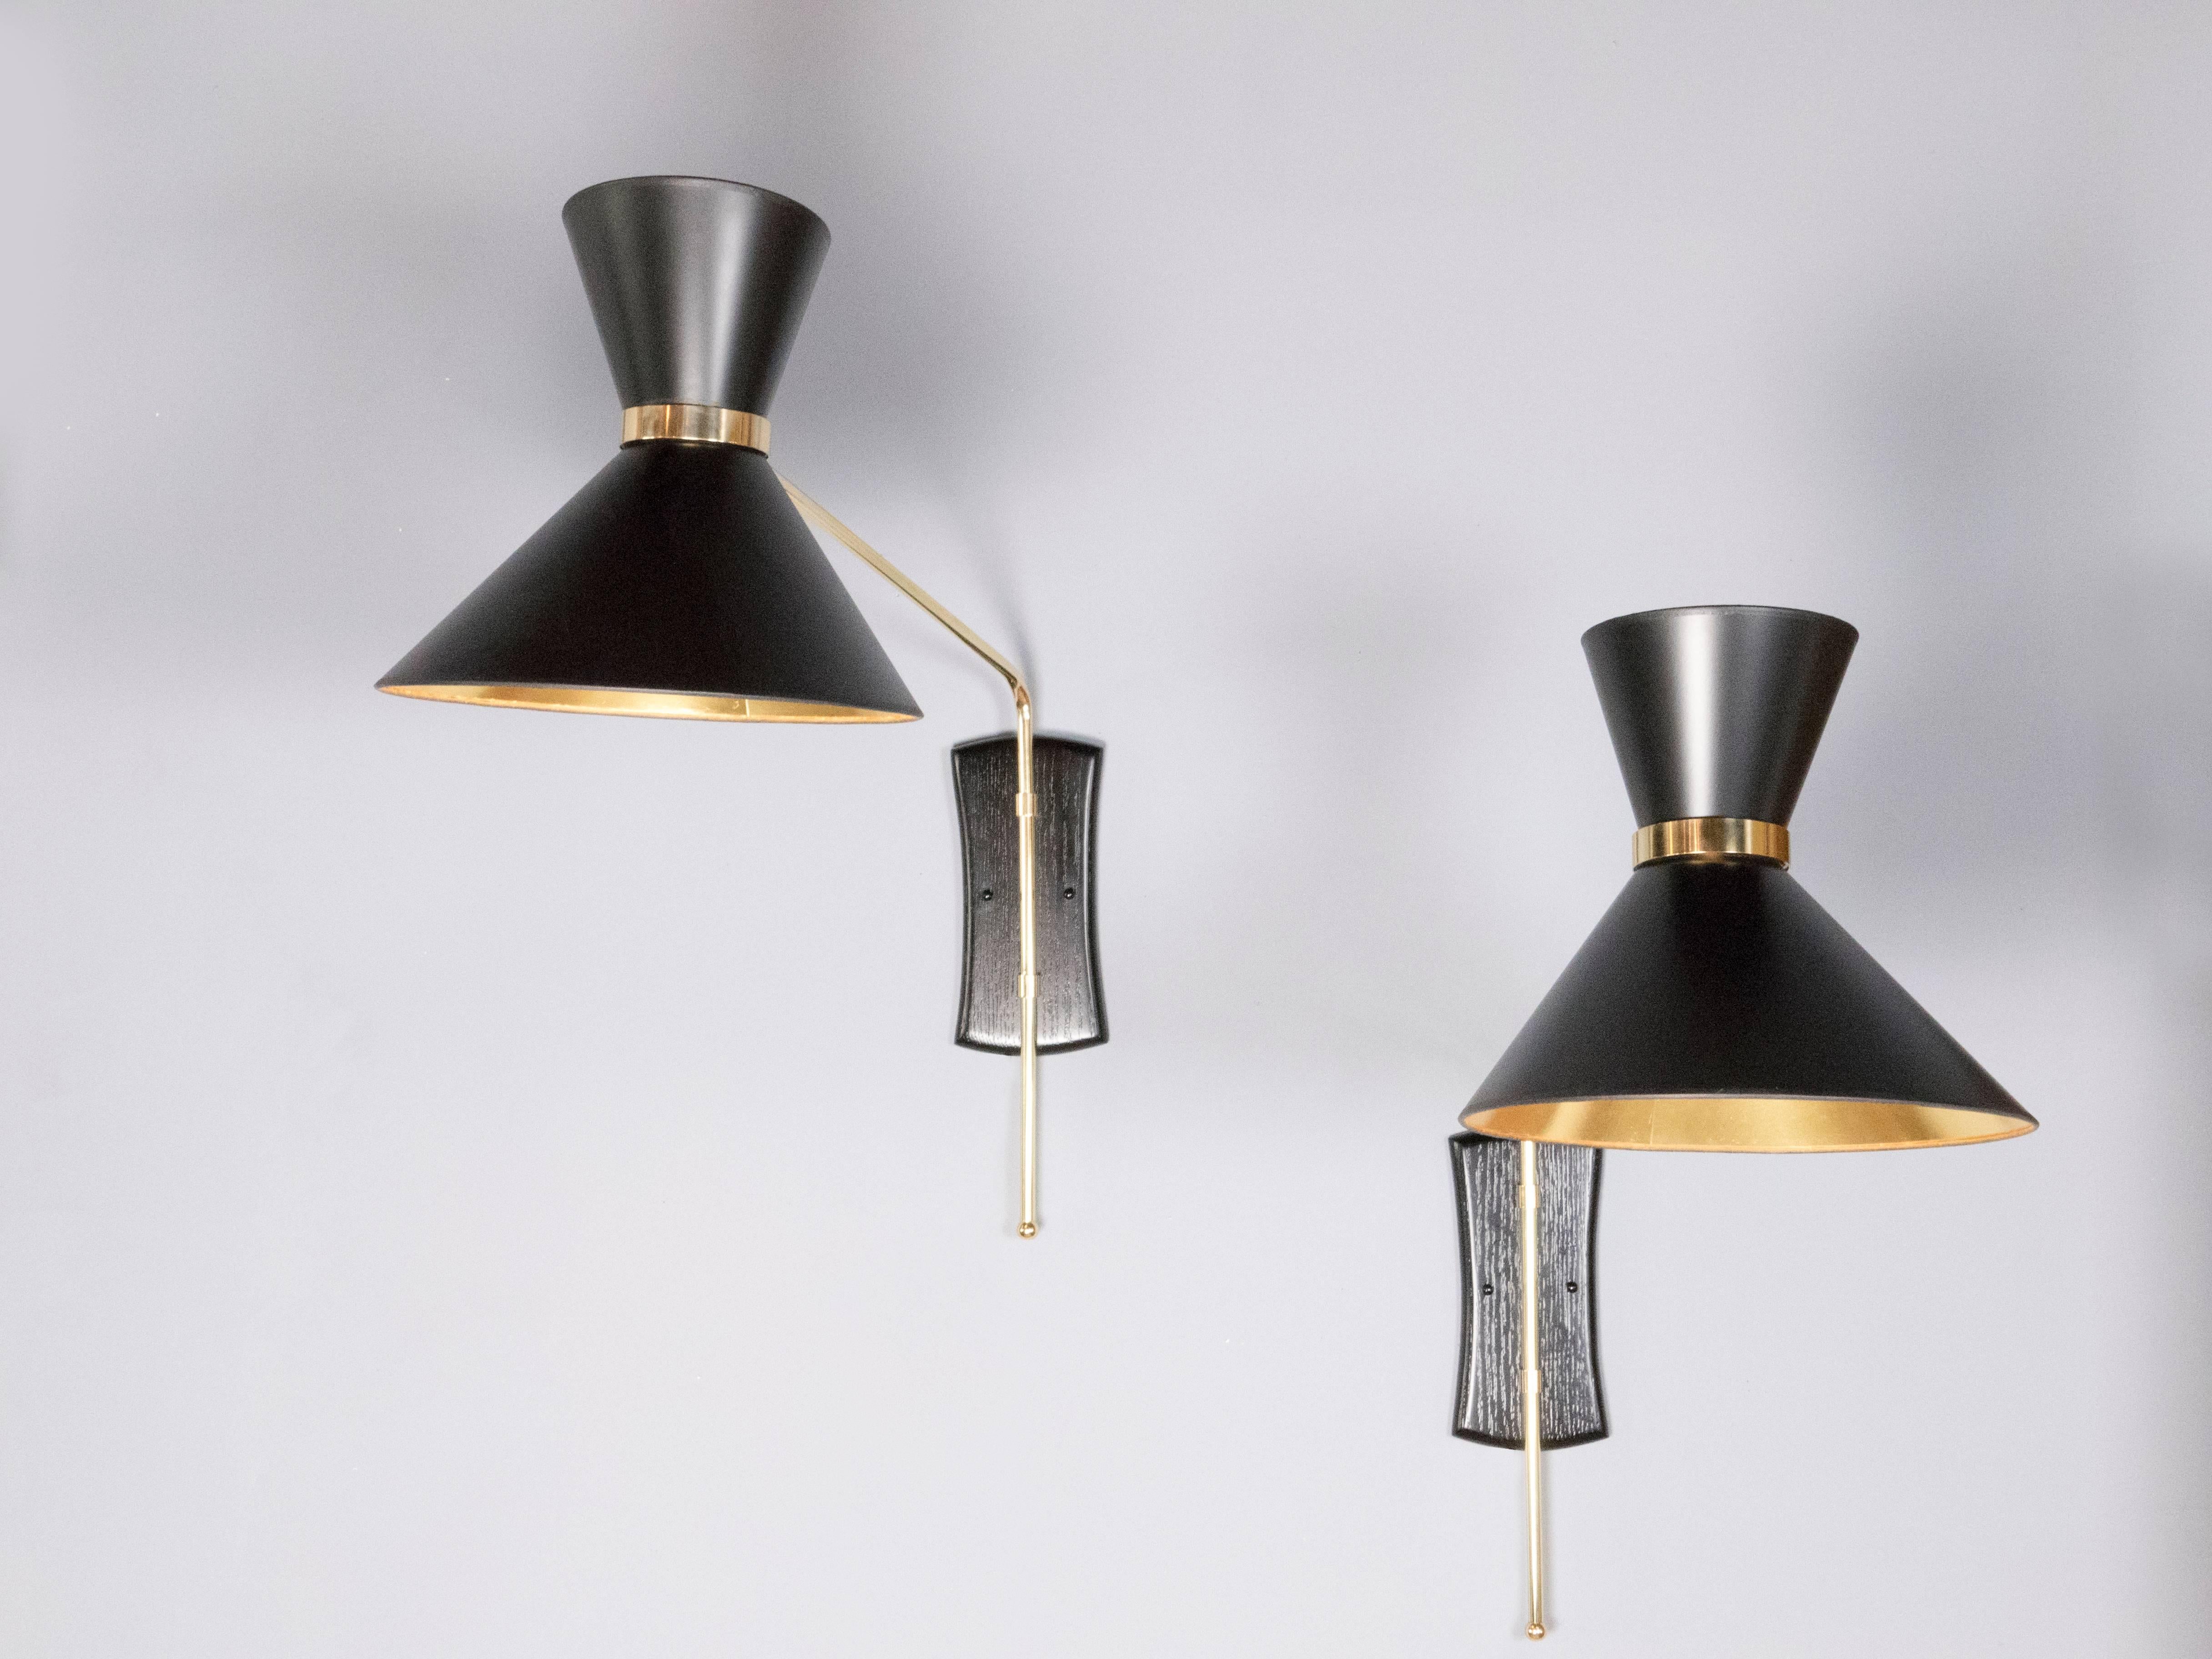 Two elegant brass swing arm sconces with double black cotton shades and silver foil lining which create a very versatile lighting source. The pivoting arm and swiveling head are fitted with two sockets providing both up and down light. The back